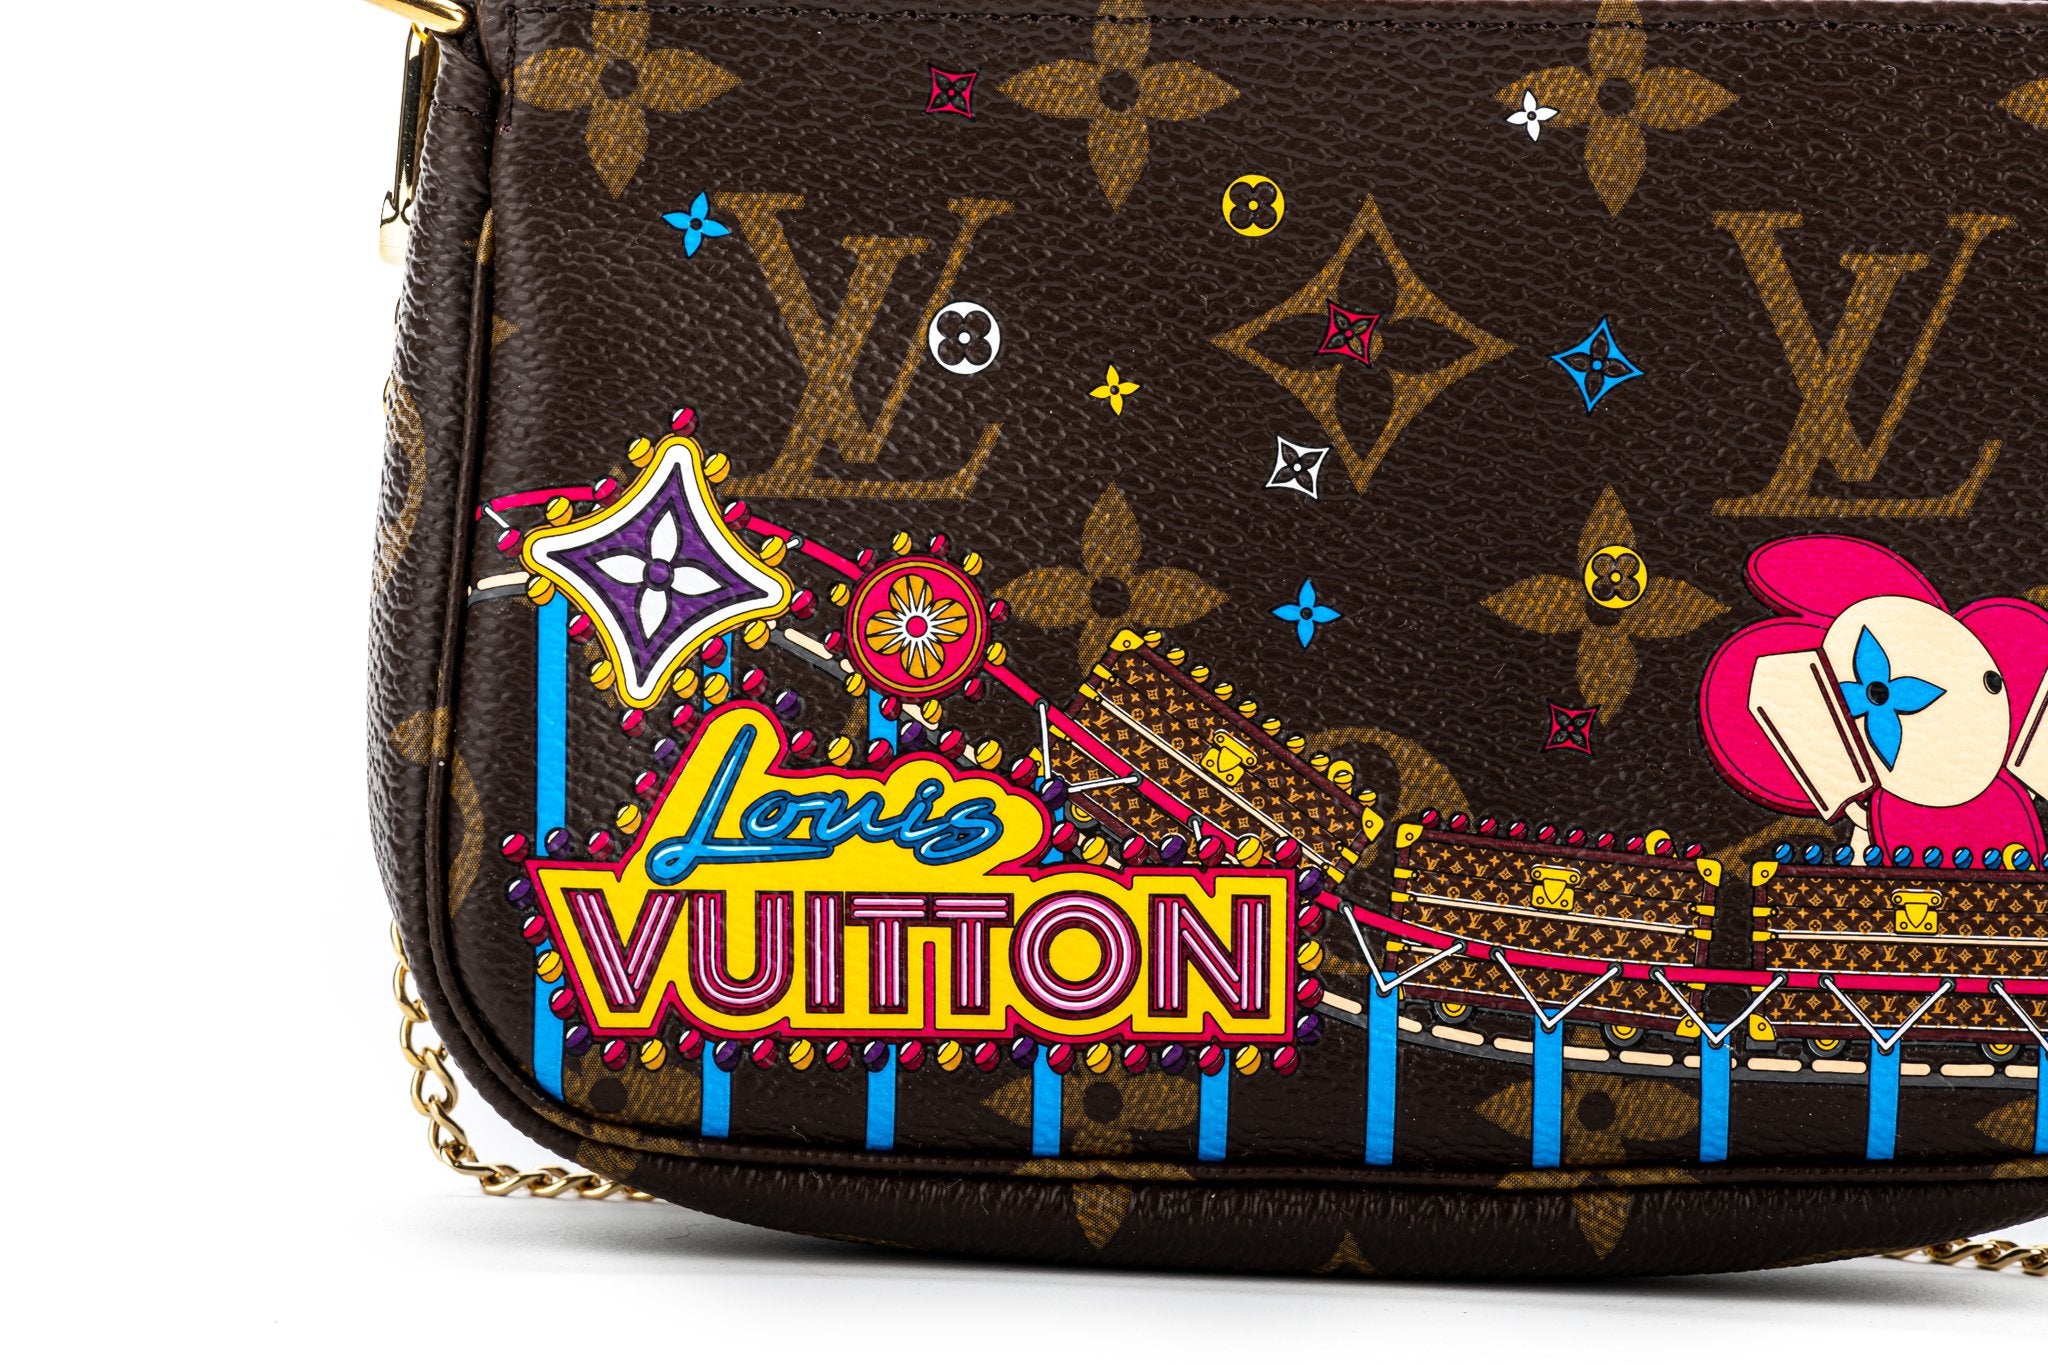 BRAND NEW LIMITED EDITION Authentic Louis Vuitton Holiday 2020